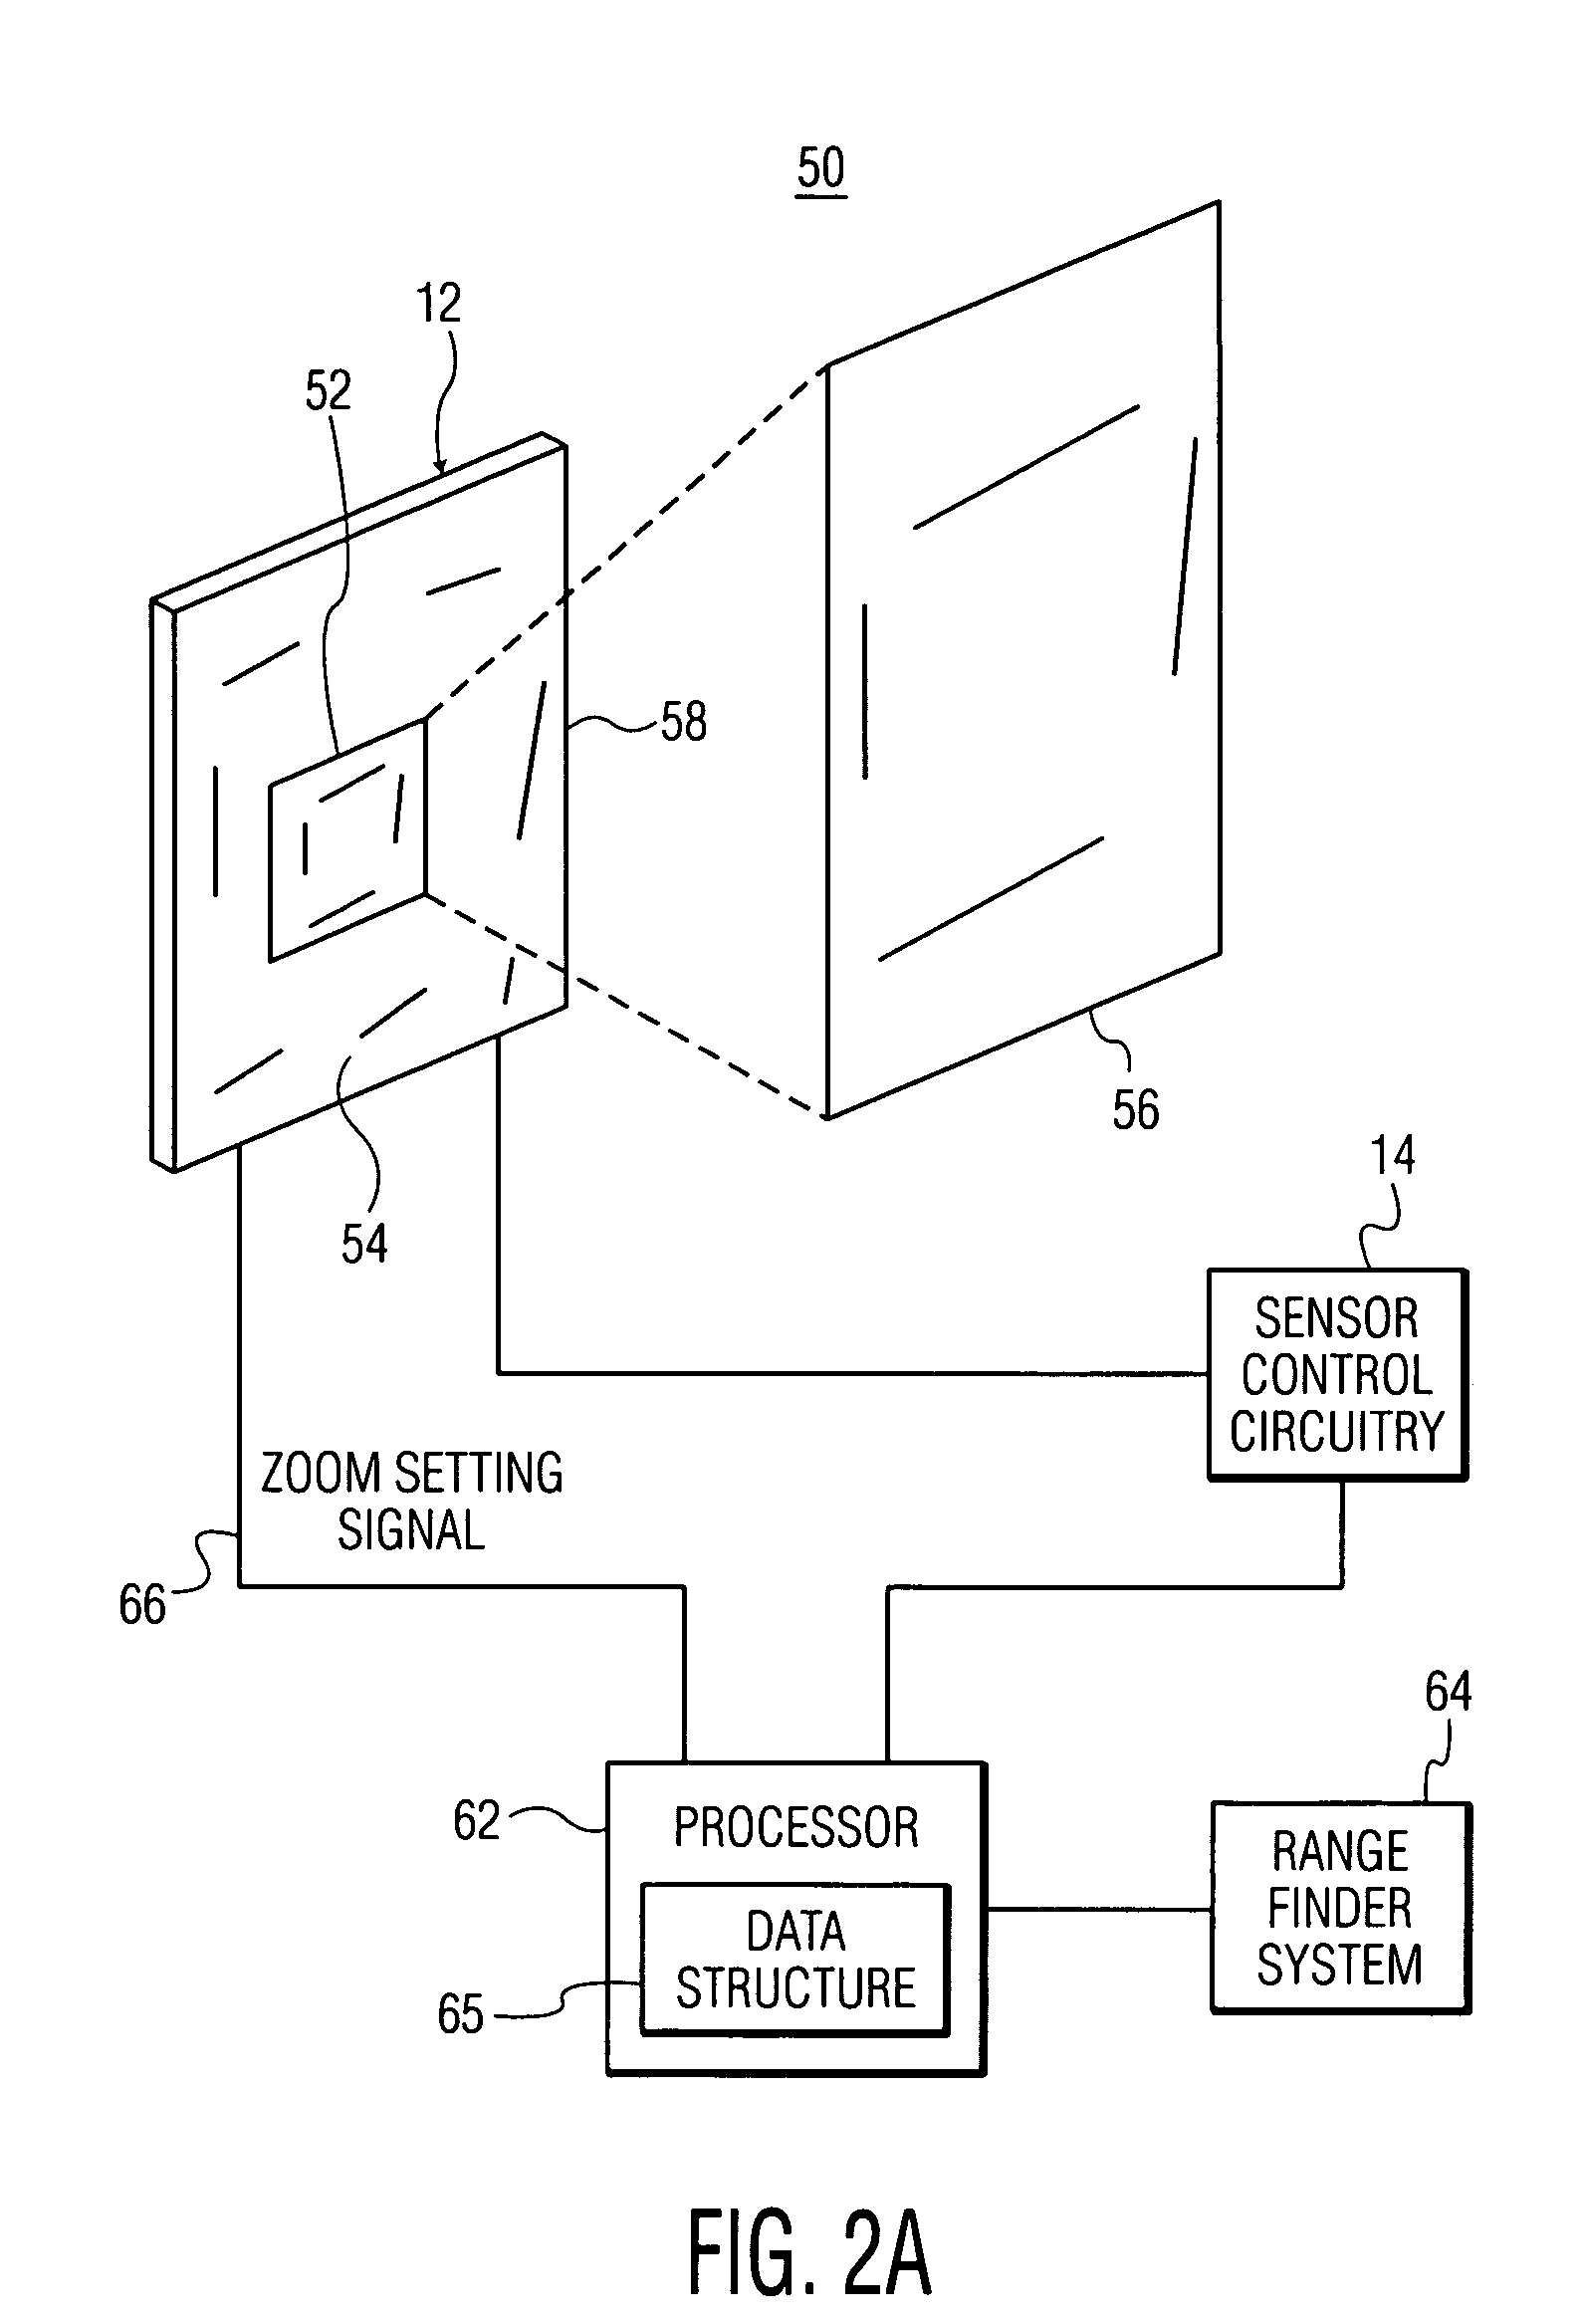 Optical code reading system and method using a variable resolution imaging sensor